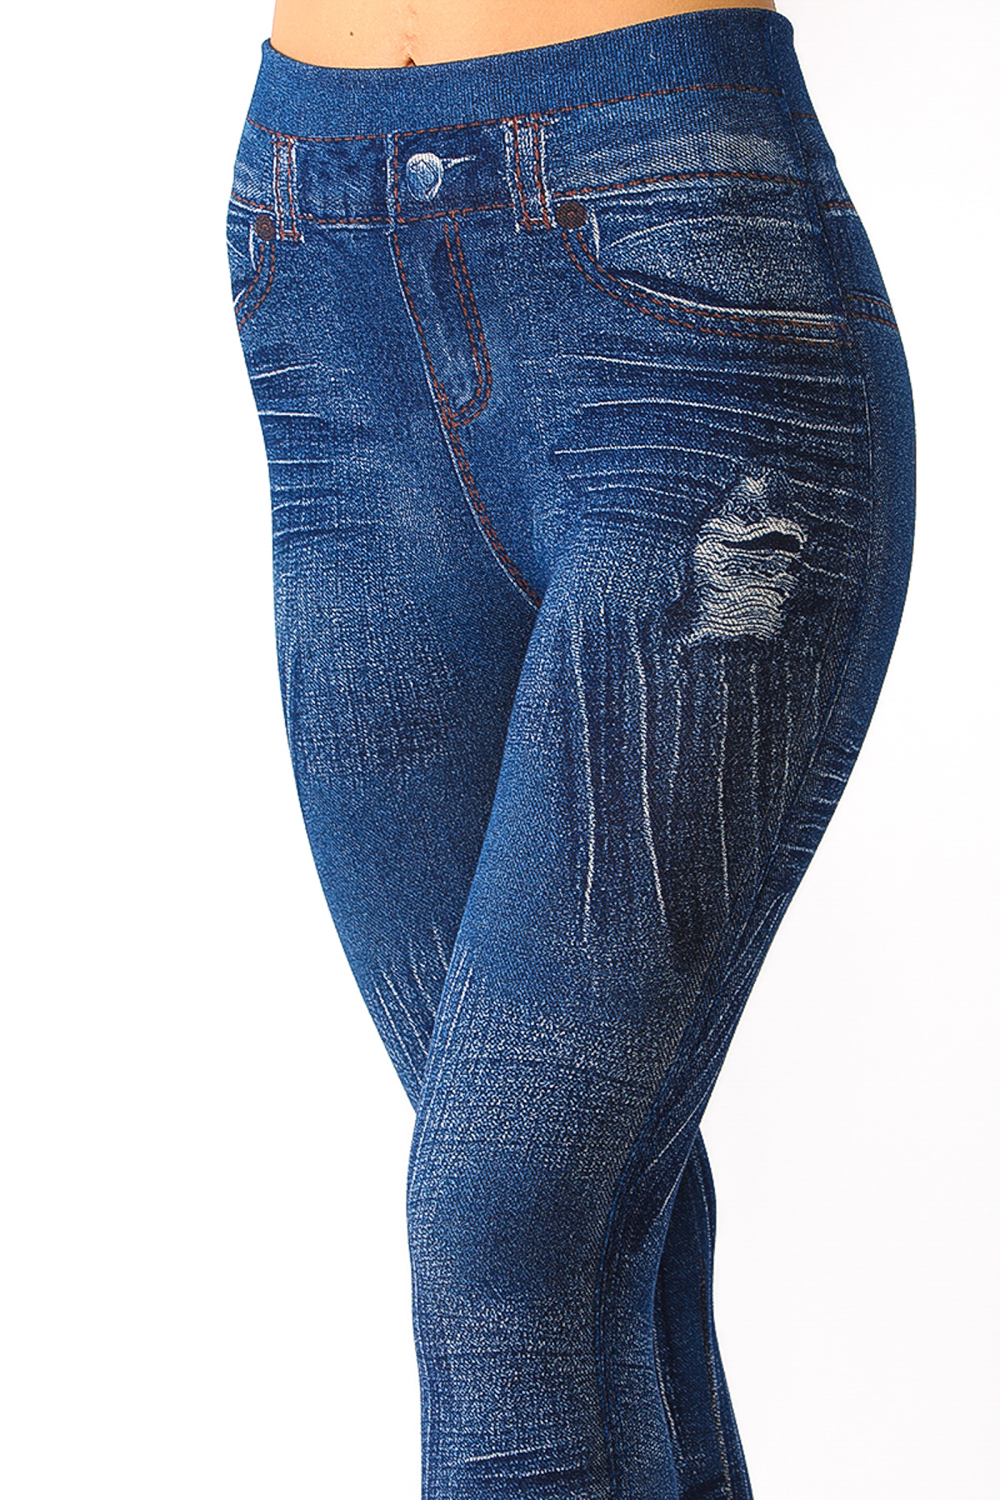 Denim Leggings with Ripped Look Distressed and Floral Pattern - 3